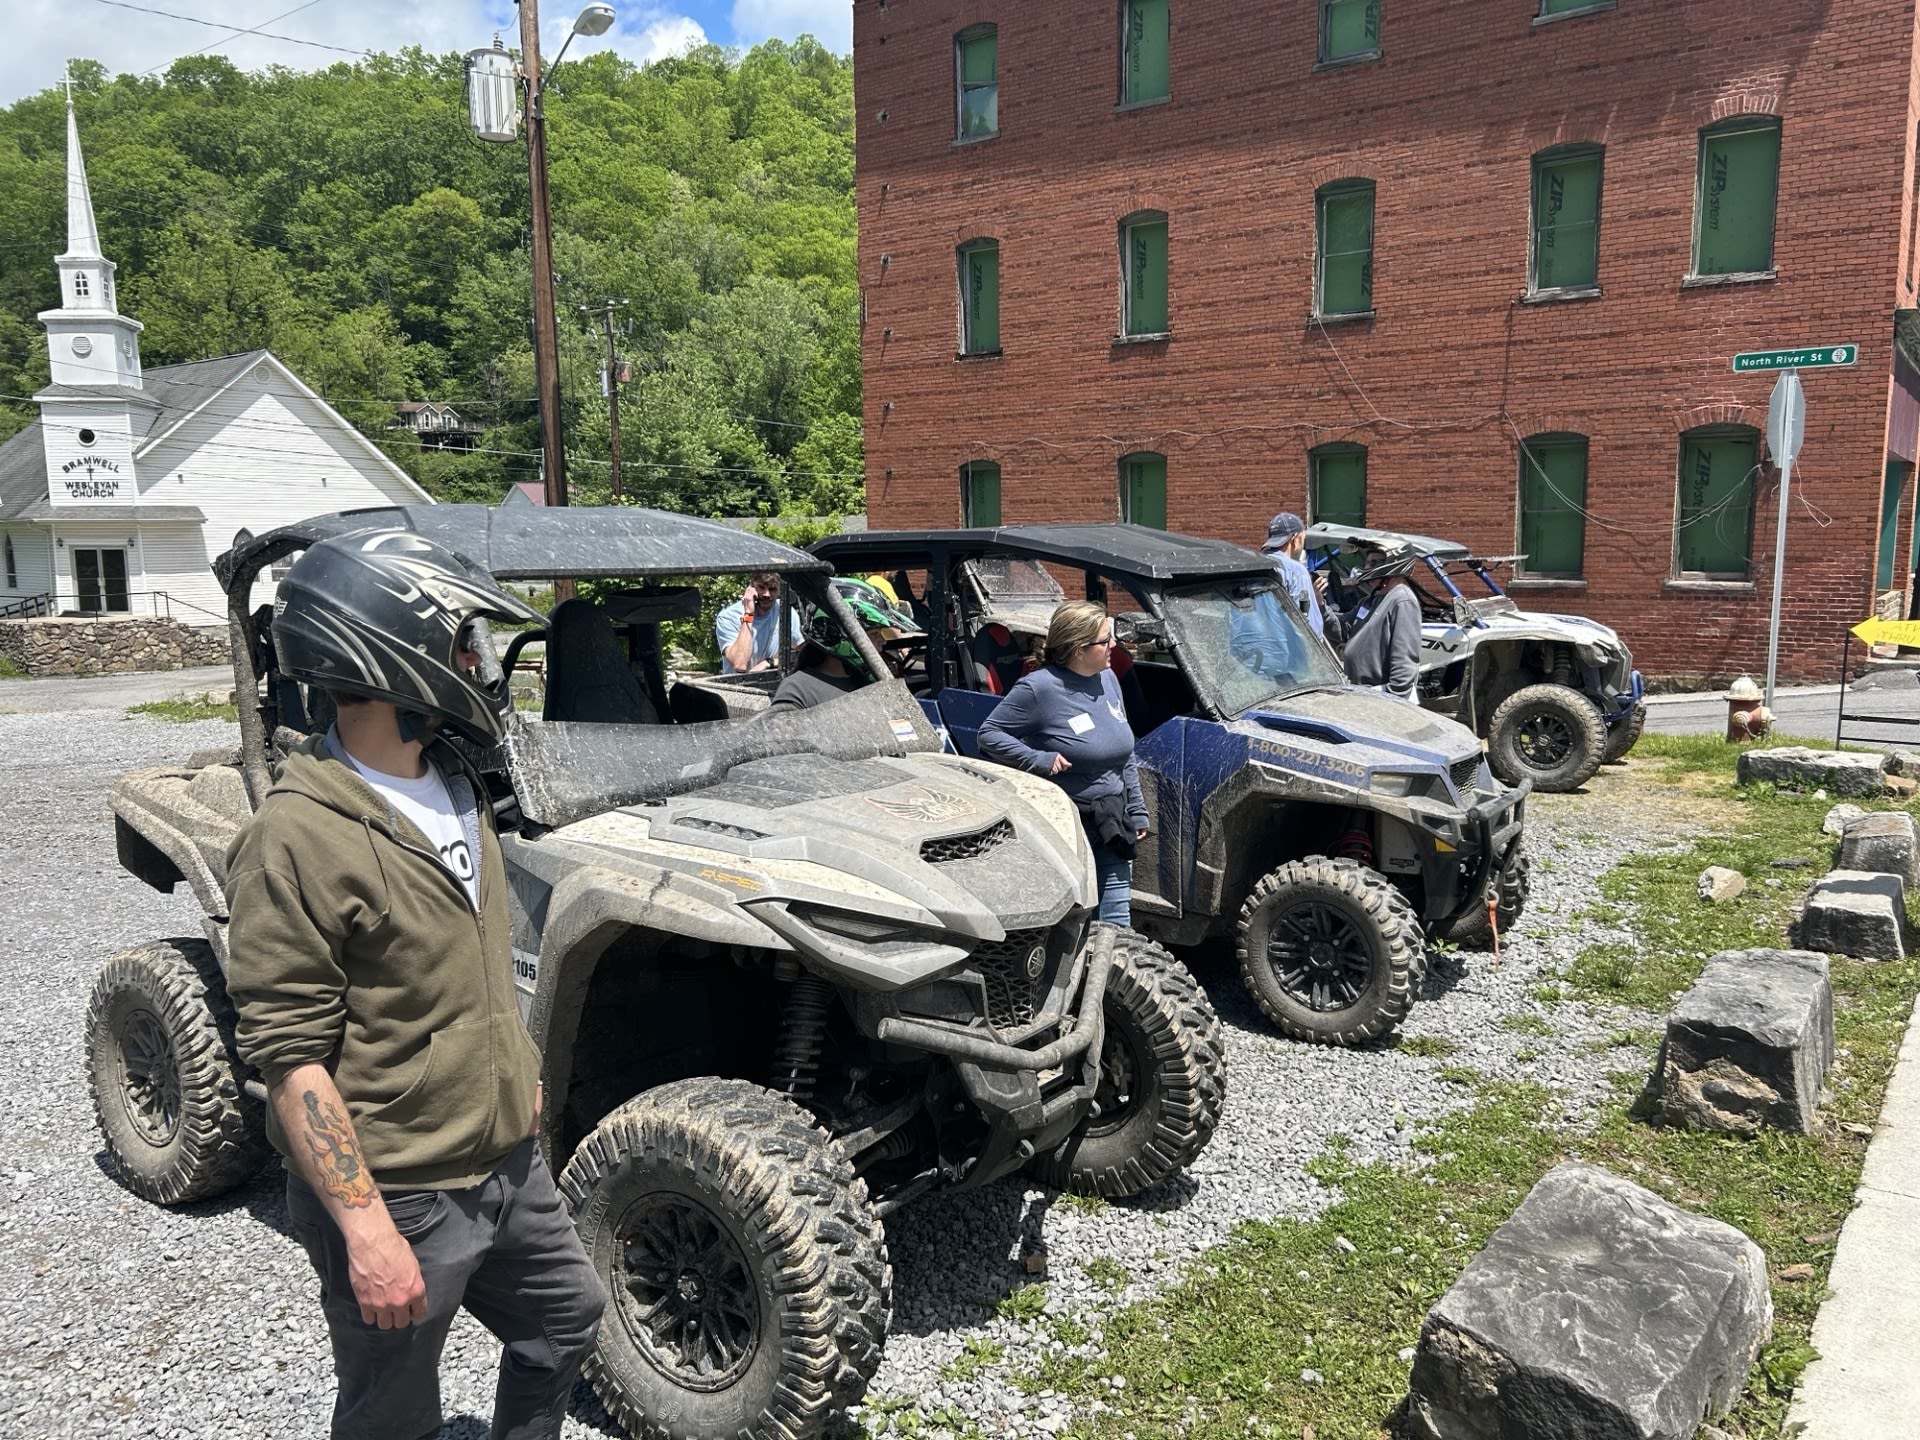 Trail system continues to draw visitors and investment to Southern W.Va. - WV MetroNews